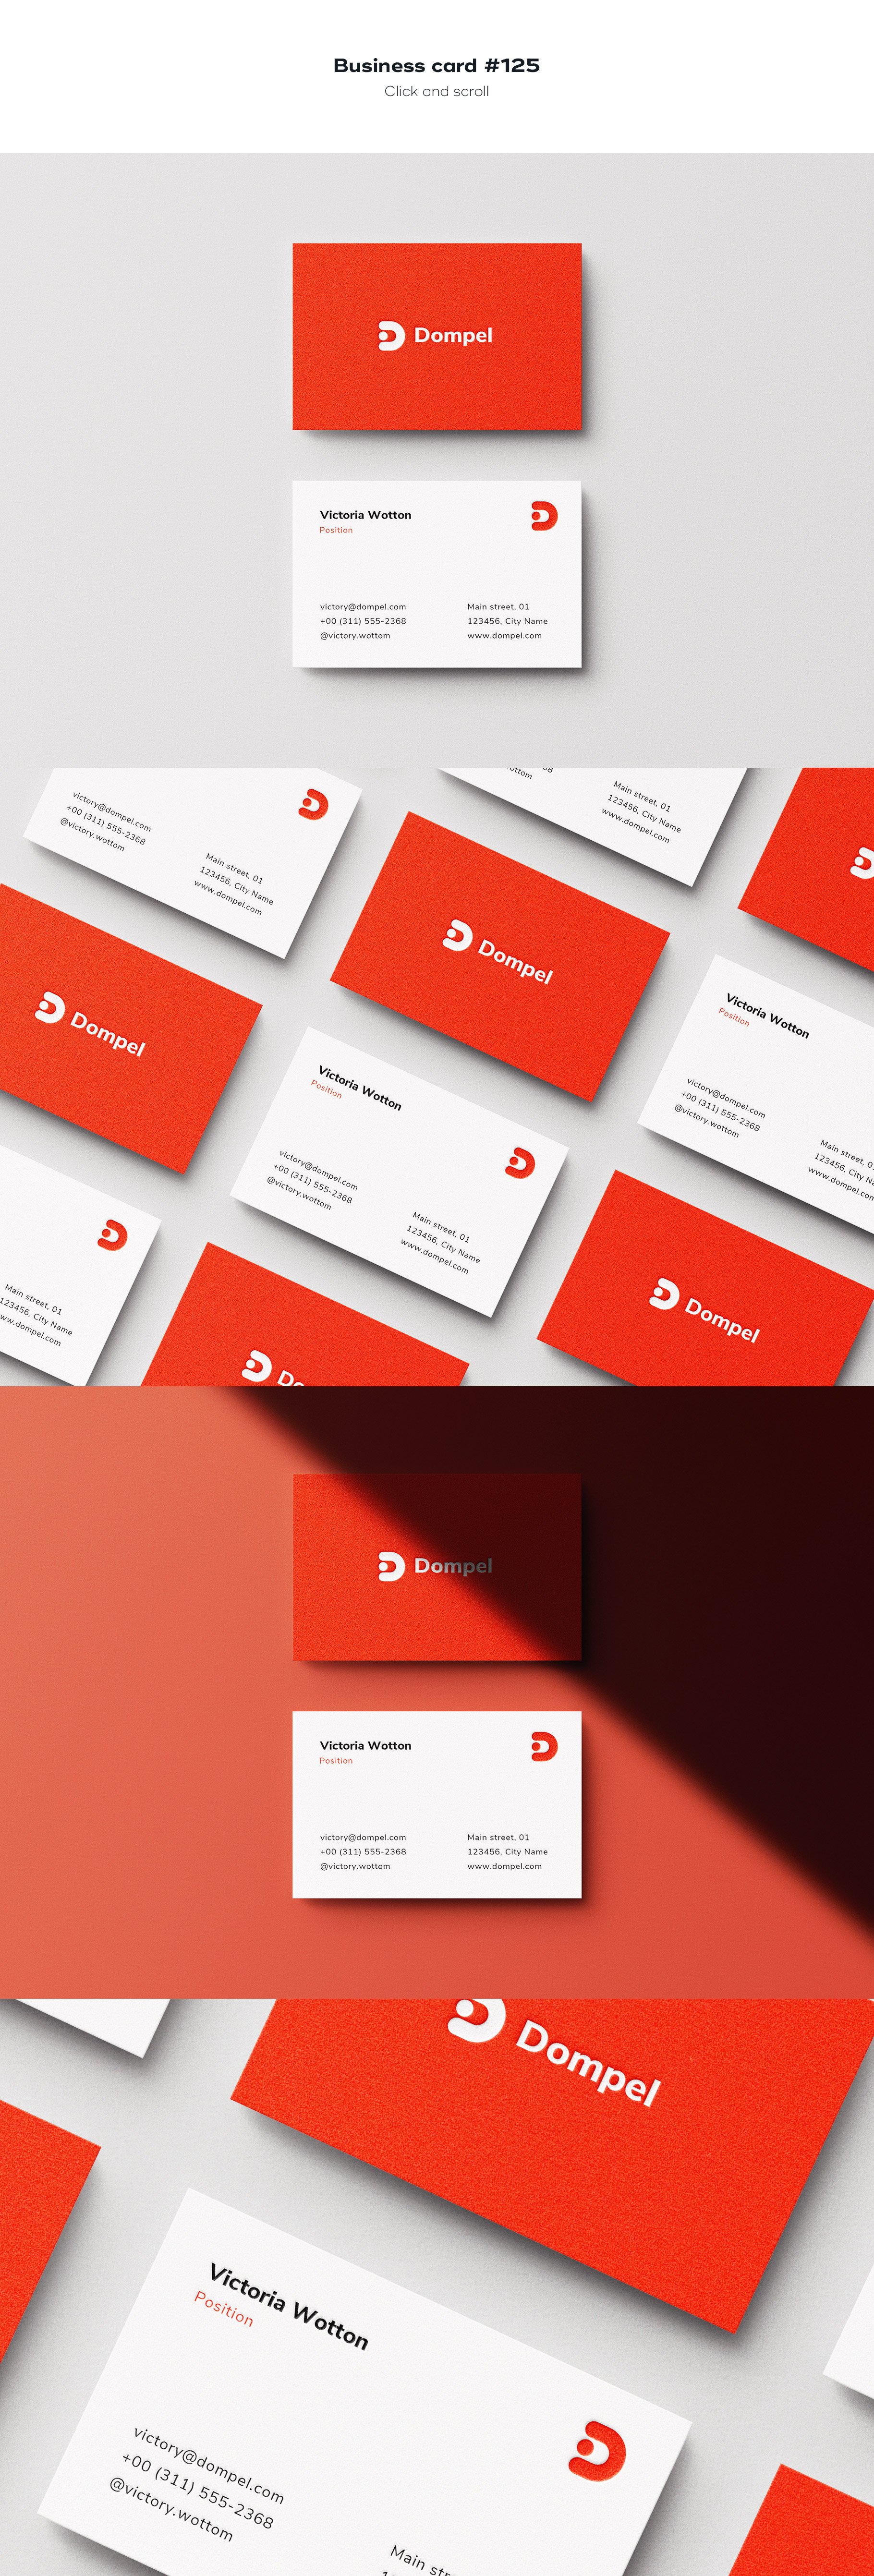 business card 125 734